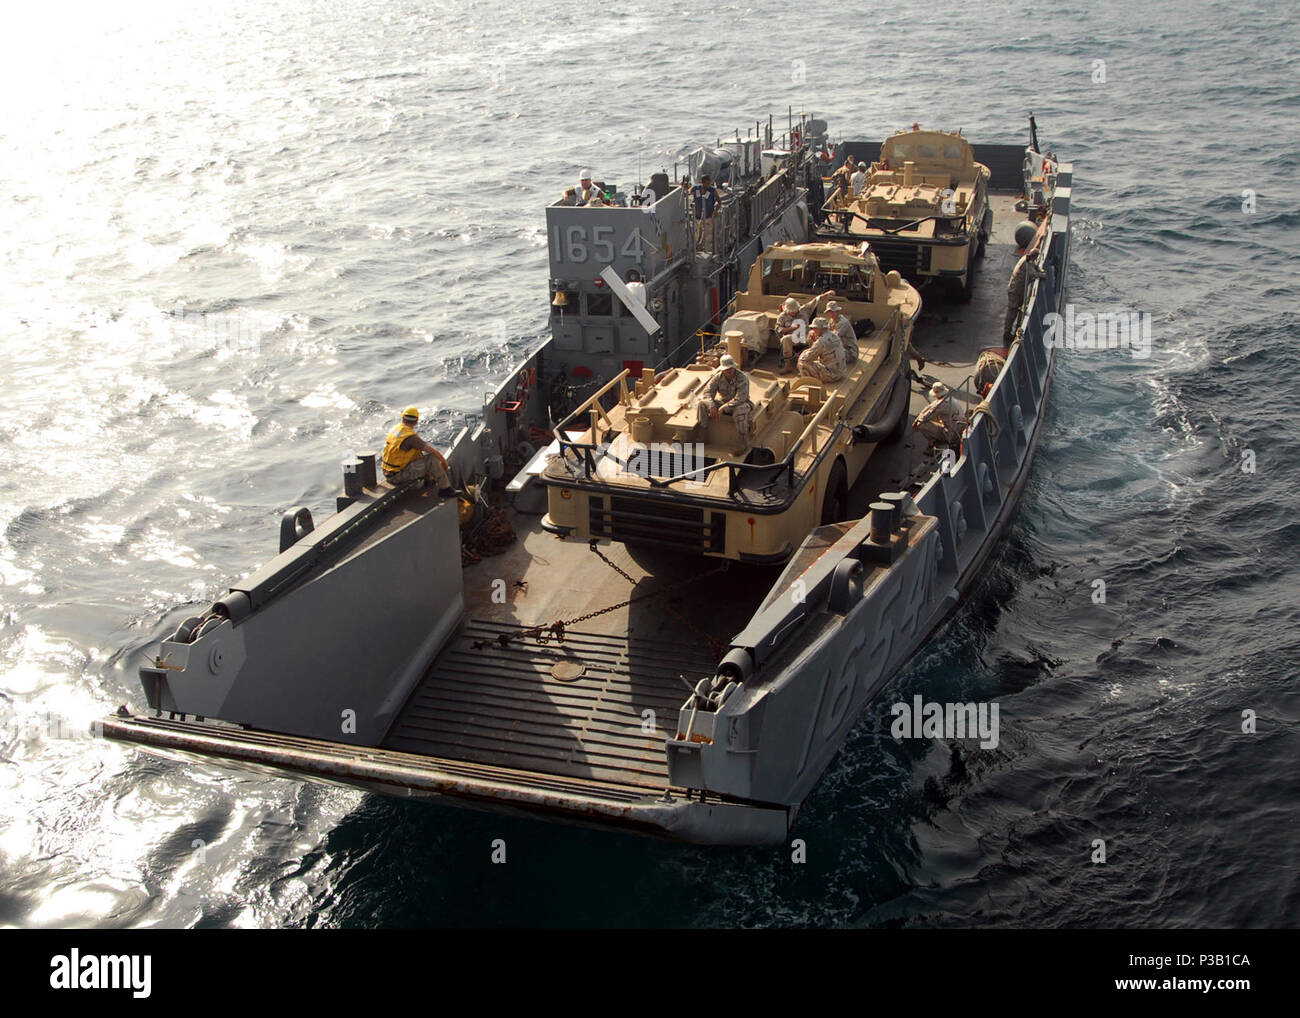 GULF (Oct. 18, 2008) A landing craft utility assigned to Assault Craft Unit (ACU) 4 disembarks from the amphibious dock landing ship USS Carter Hall (LSD 50) to conduct amphibious operations. Carter Hall is deployed as part of the Iwo Jima Expeditionary Strike Group supporting maritime security operations in the U.S. 5th Fleet area of responsibility. Stock Photo